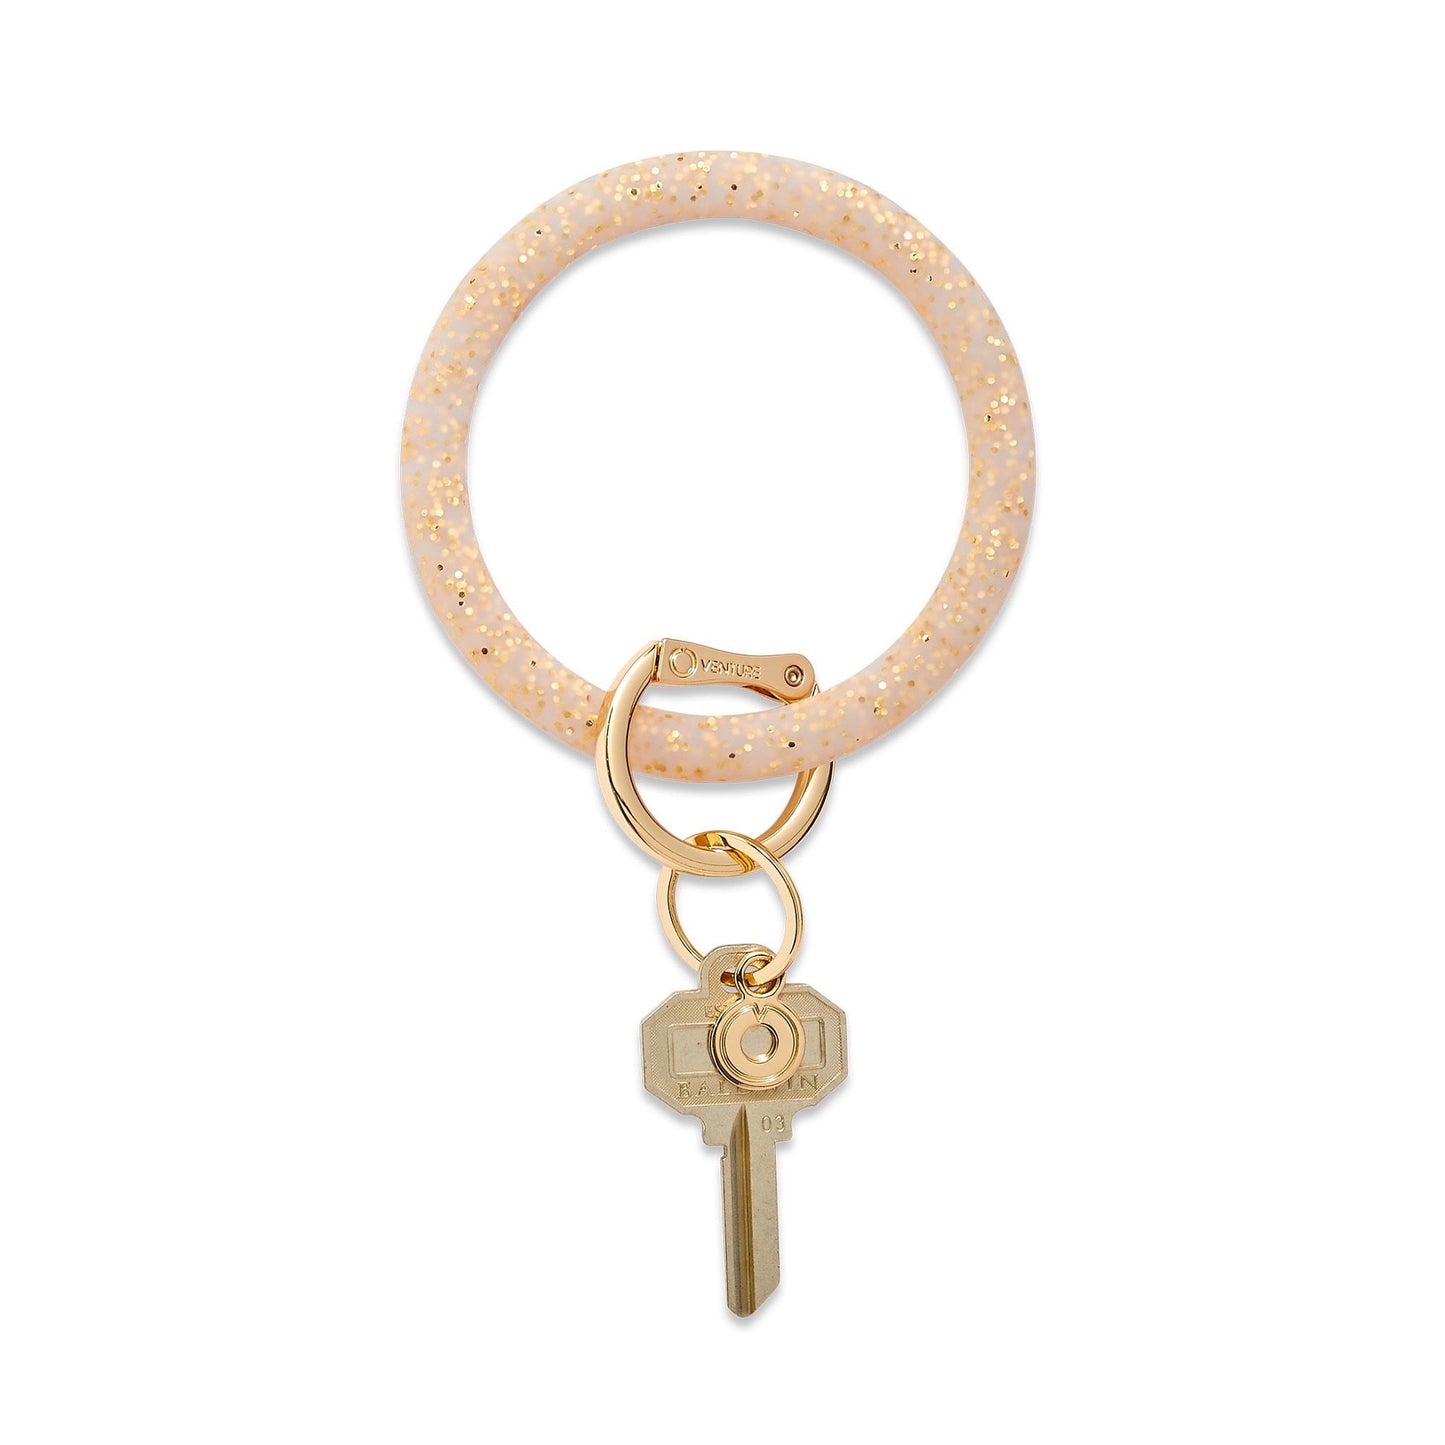 Oventure Big O Key Ring in Gold Confetti Silicone. Gold background with specs of gold